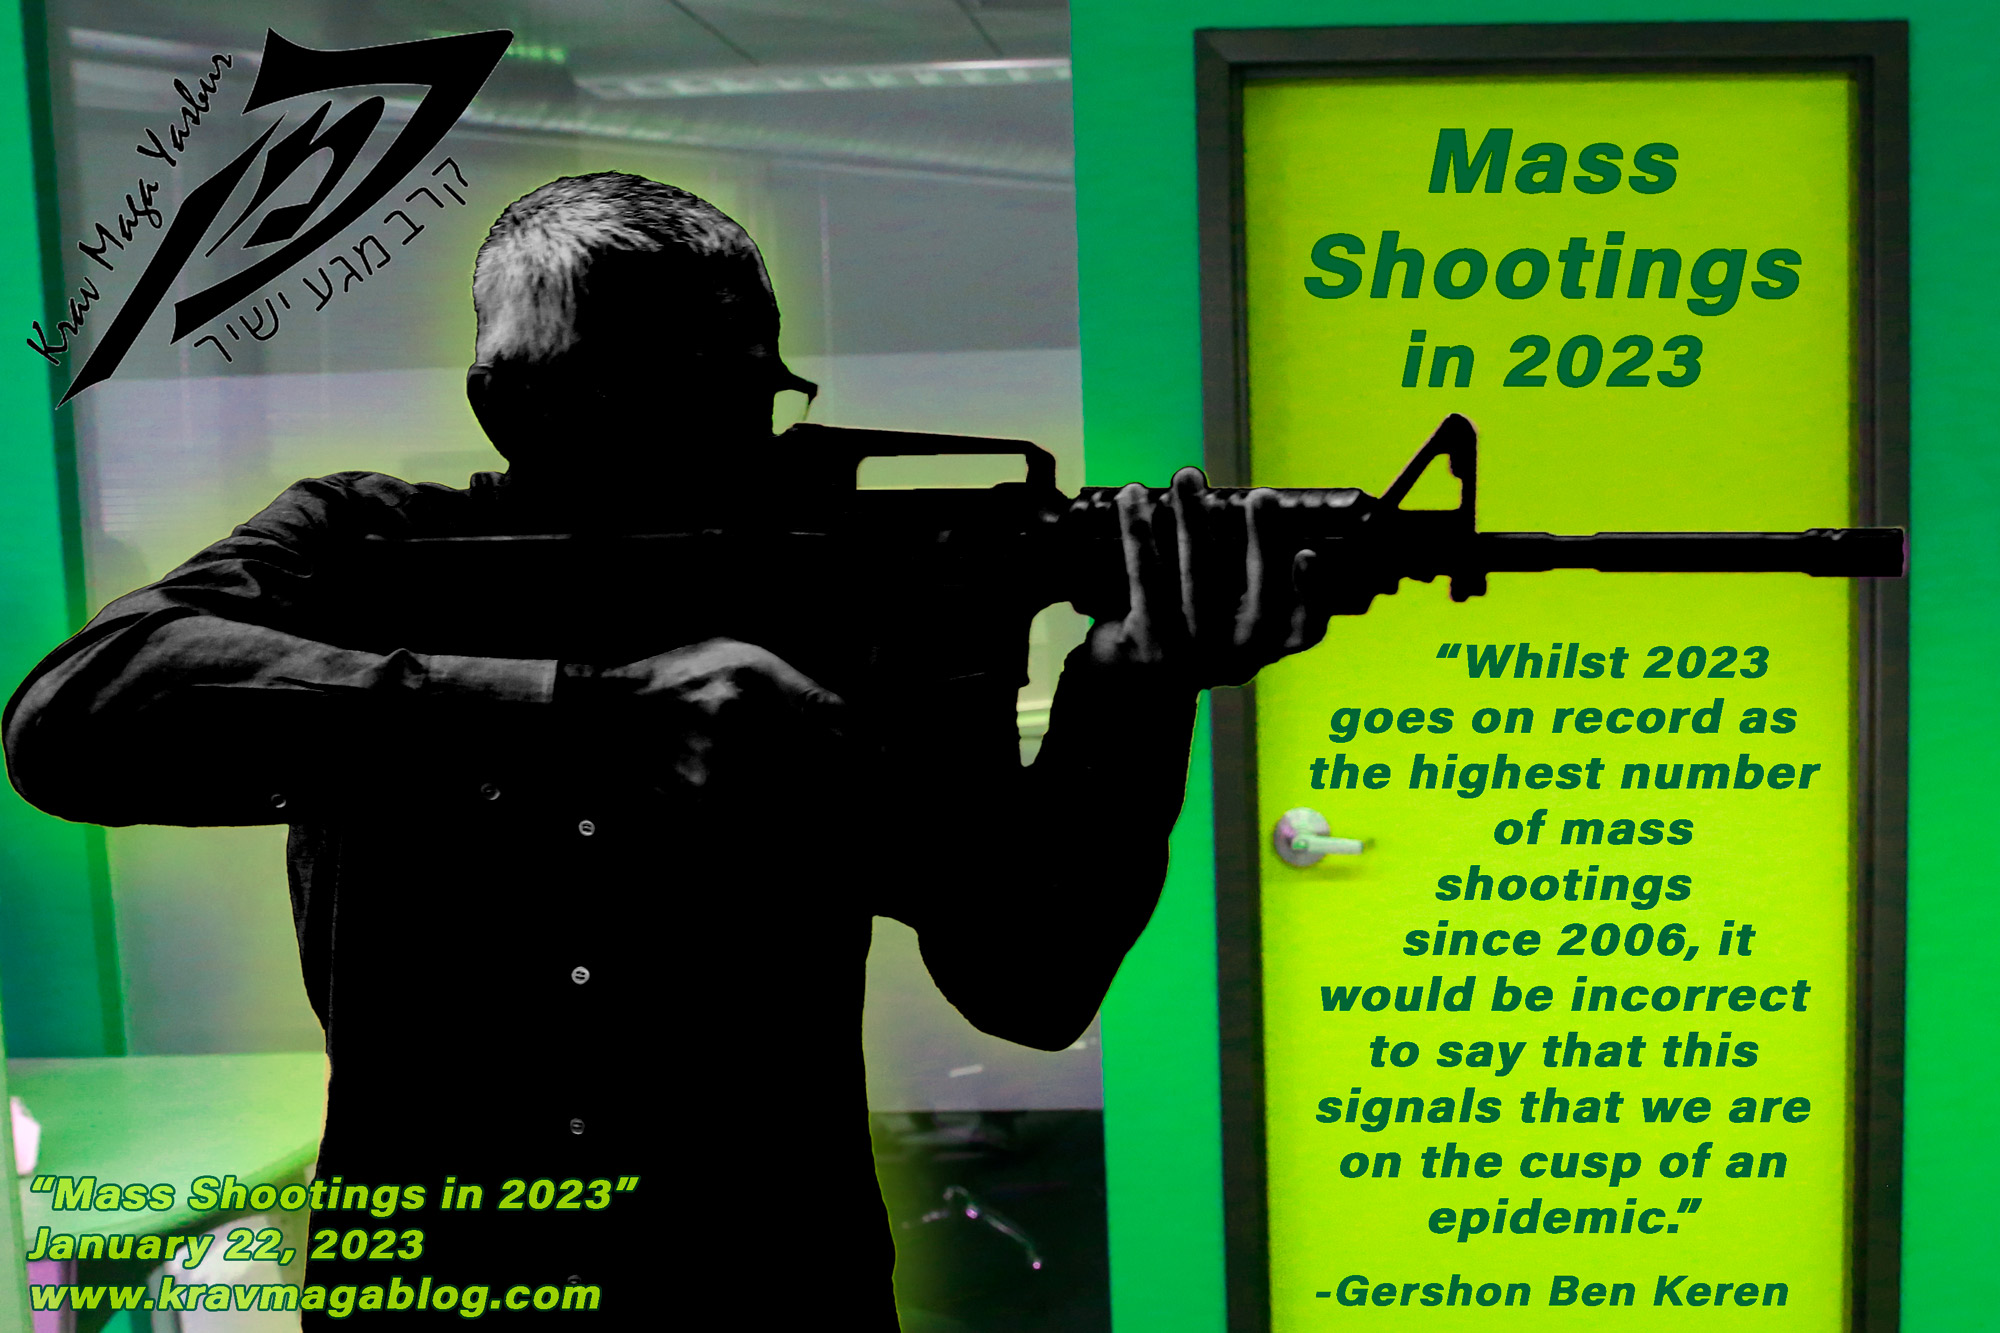 Blog About Mass Shootings in 2023